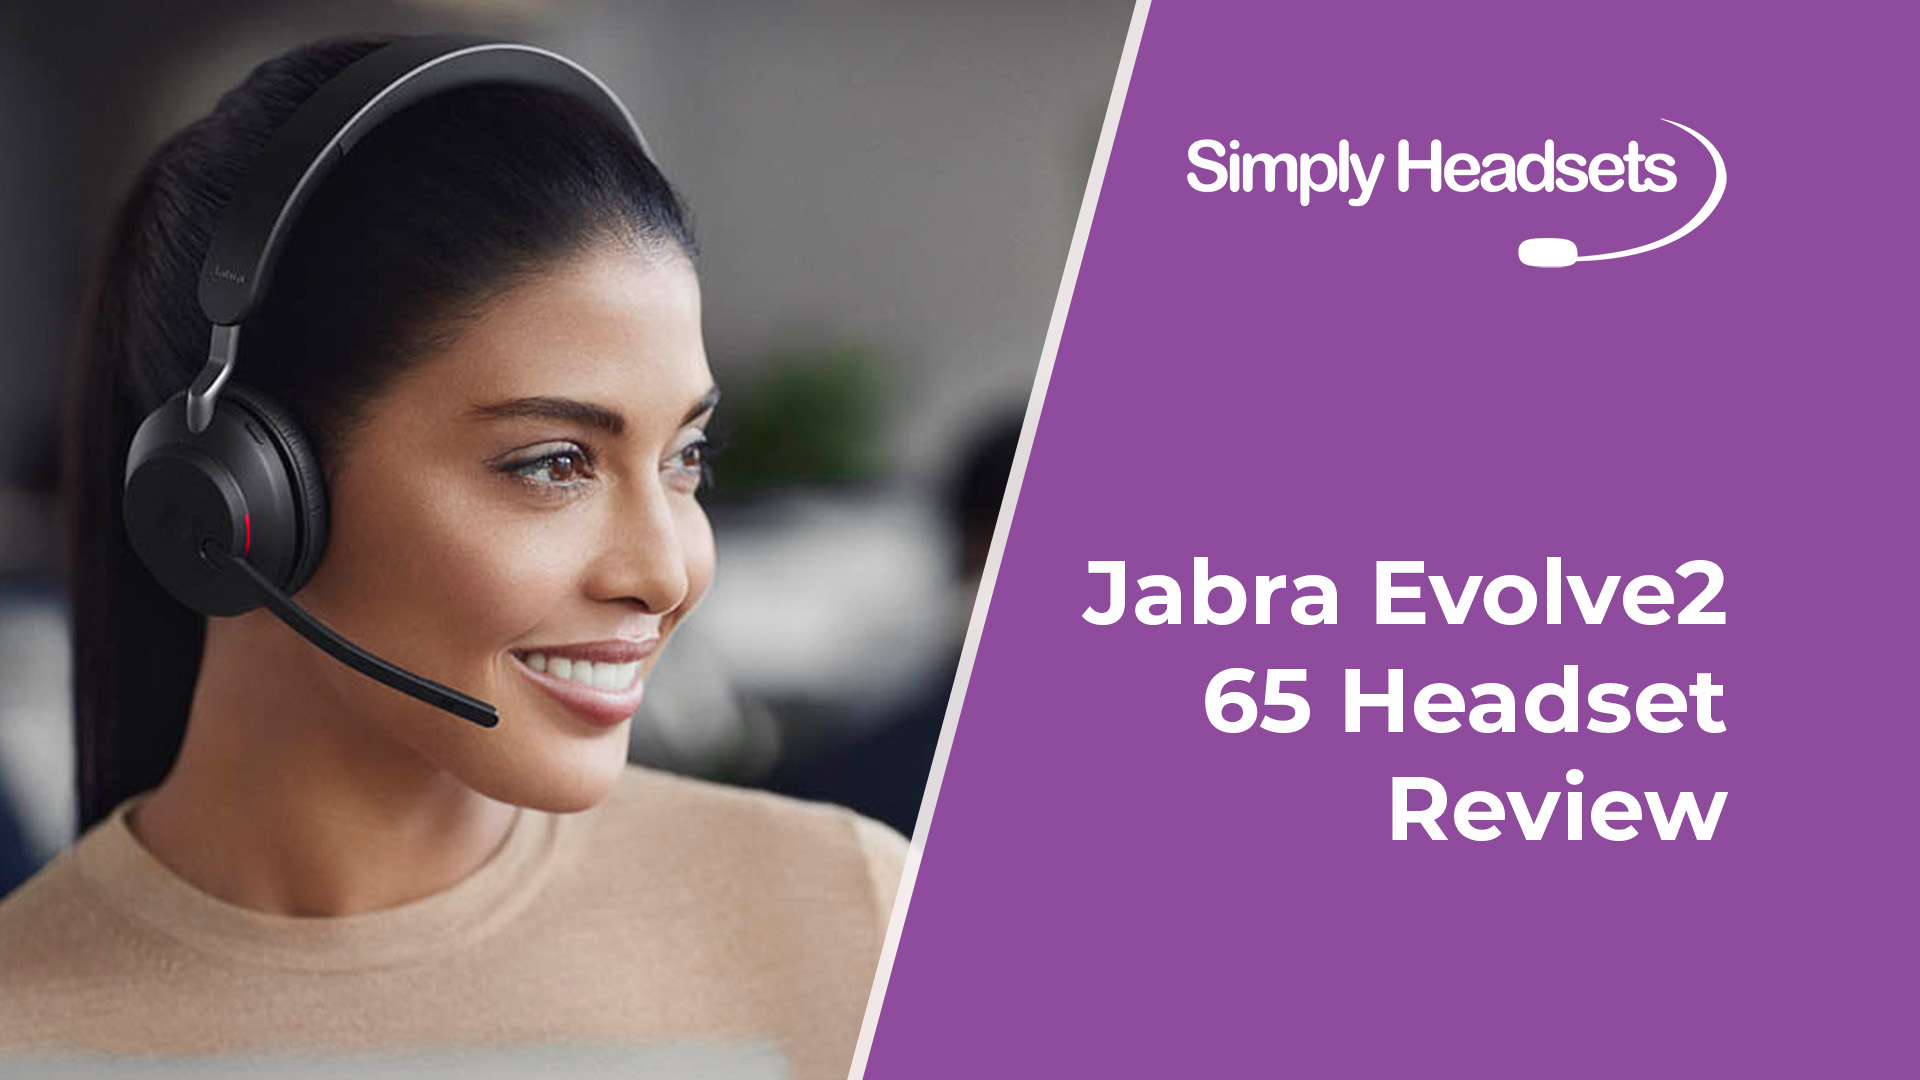 Jabra Evolve2 65 Headset Review 2023| Headsets Simply